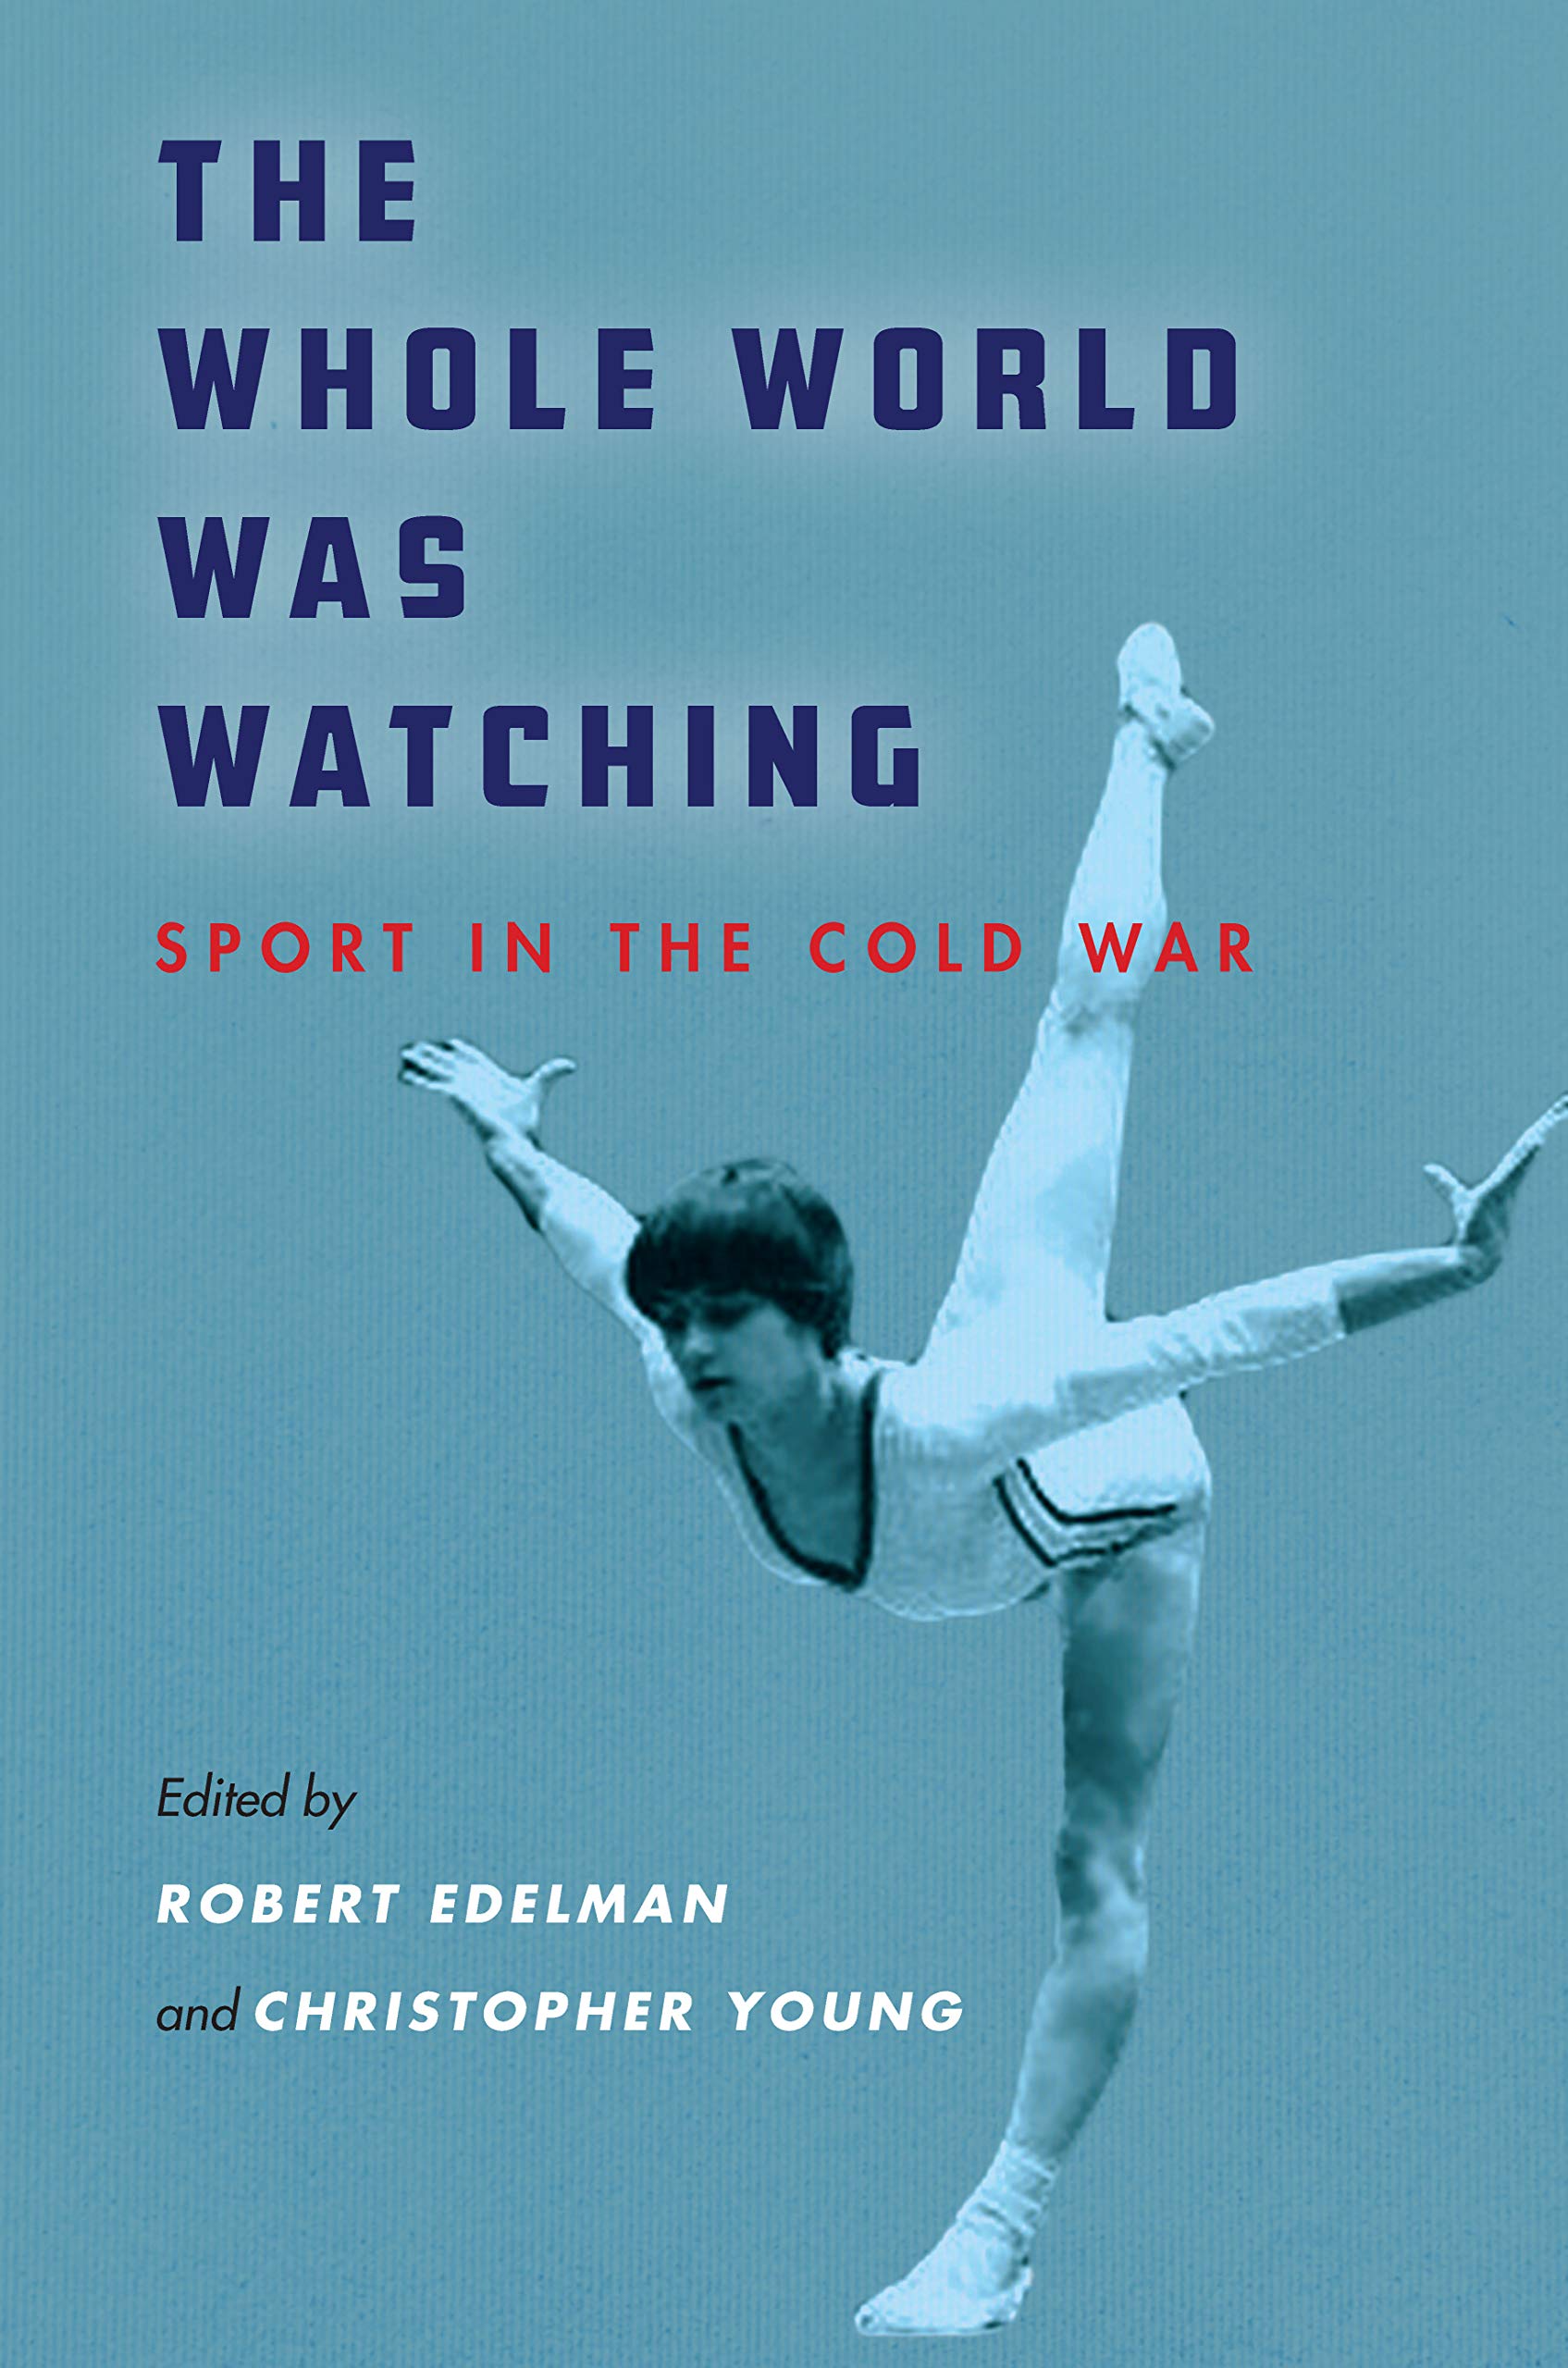 The Whole World Was Watching: Sport in the Cold War (Cold War International History Project)